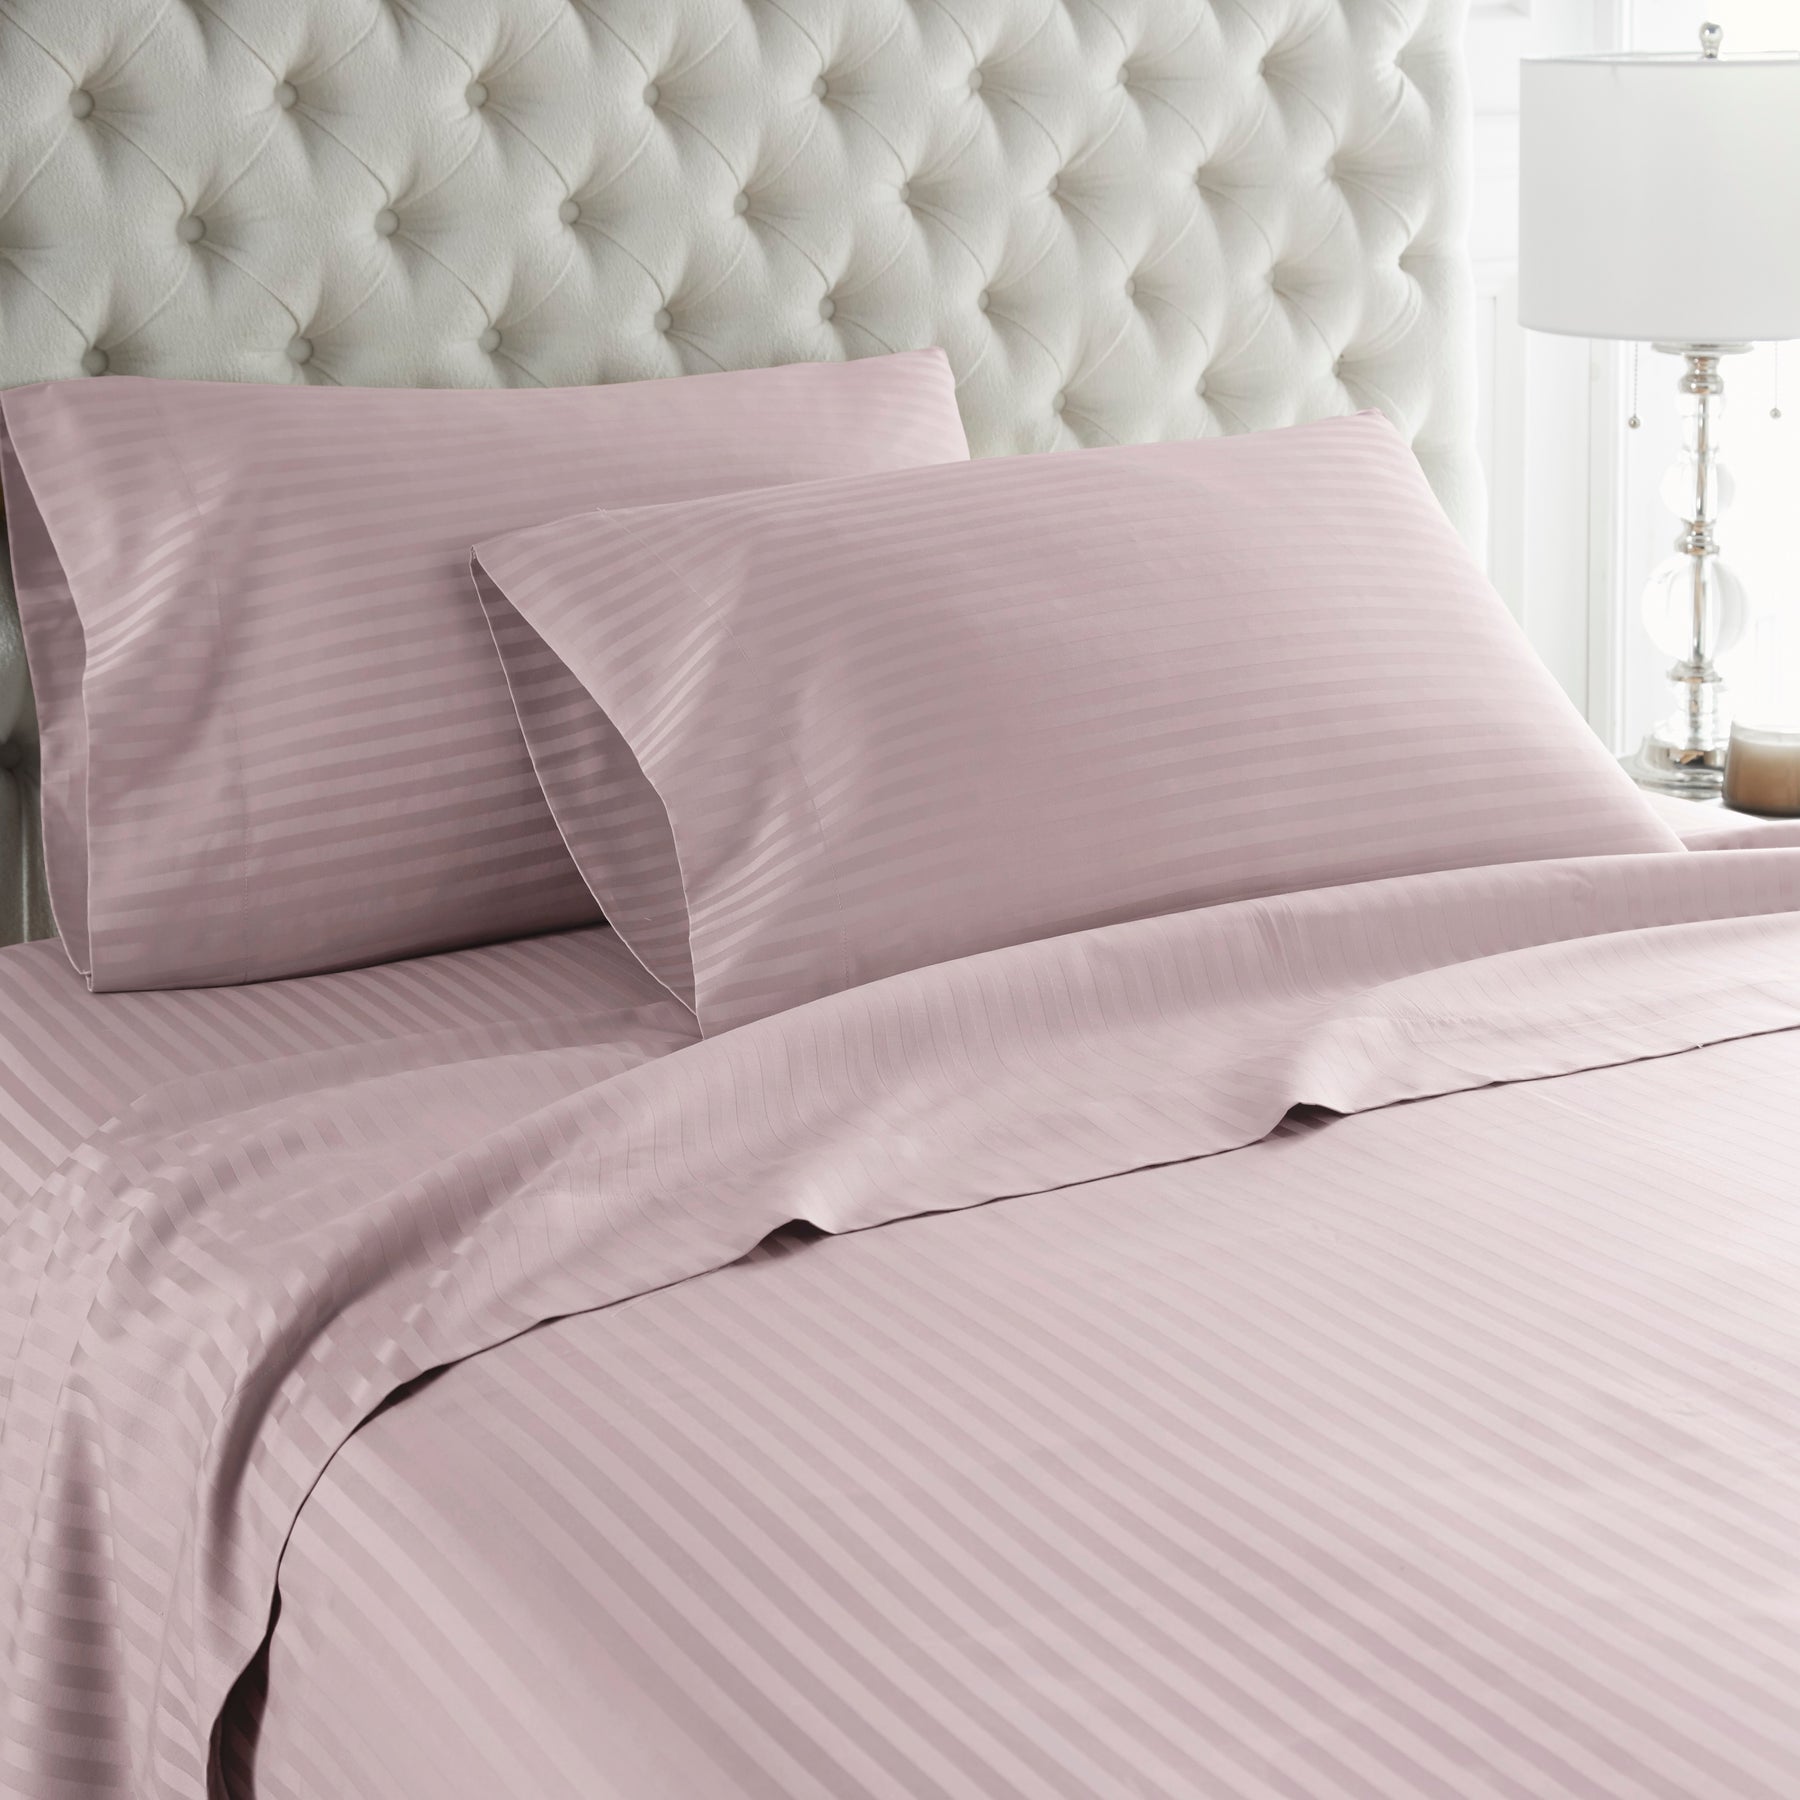 https://cdn.shopify.com/s/files/1/2059/3099/products/hotel-collection-egyptian-cotton-stripe-sheets-lavender_1800x1800.jpg?v=1601900493